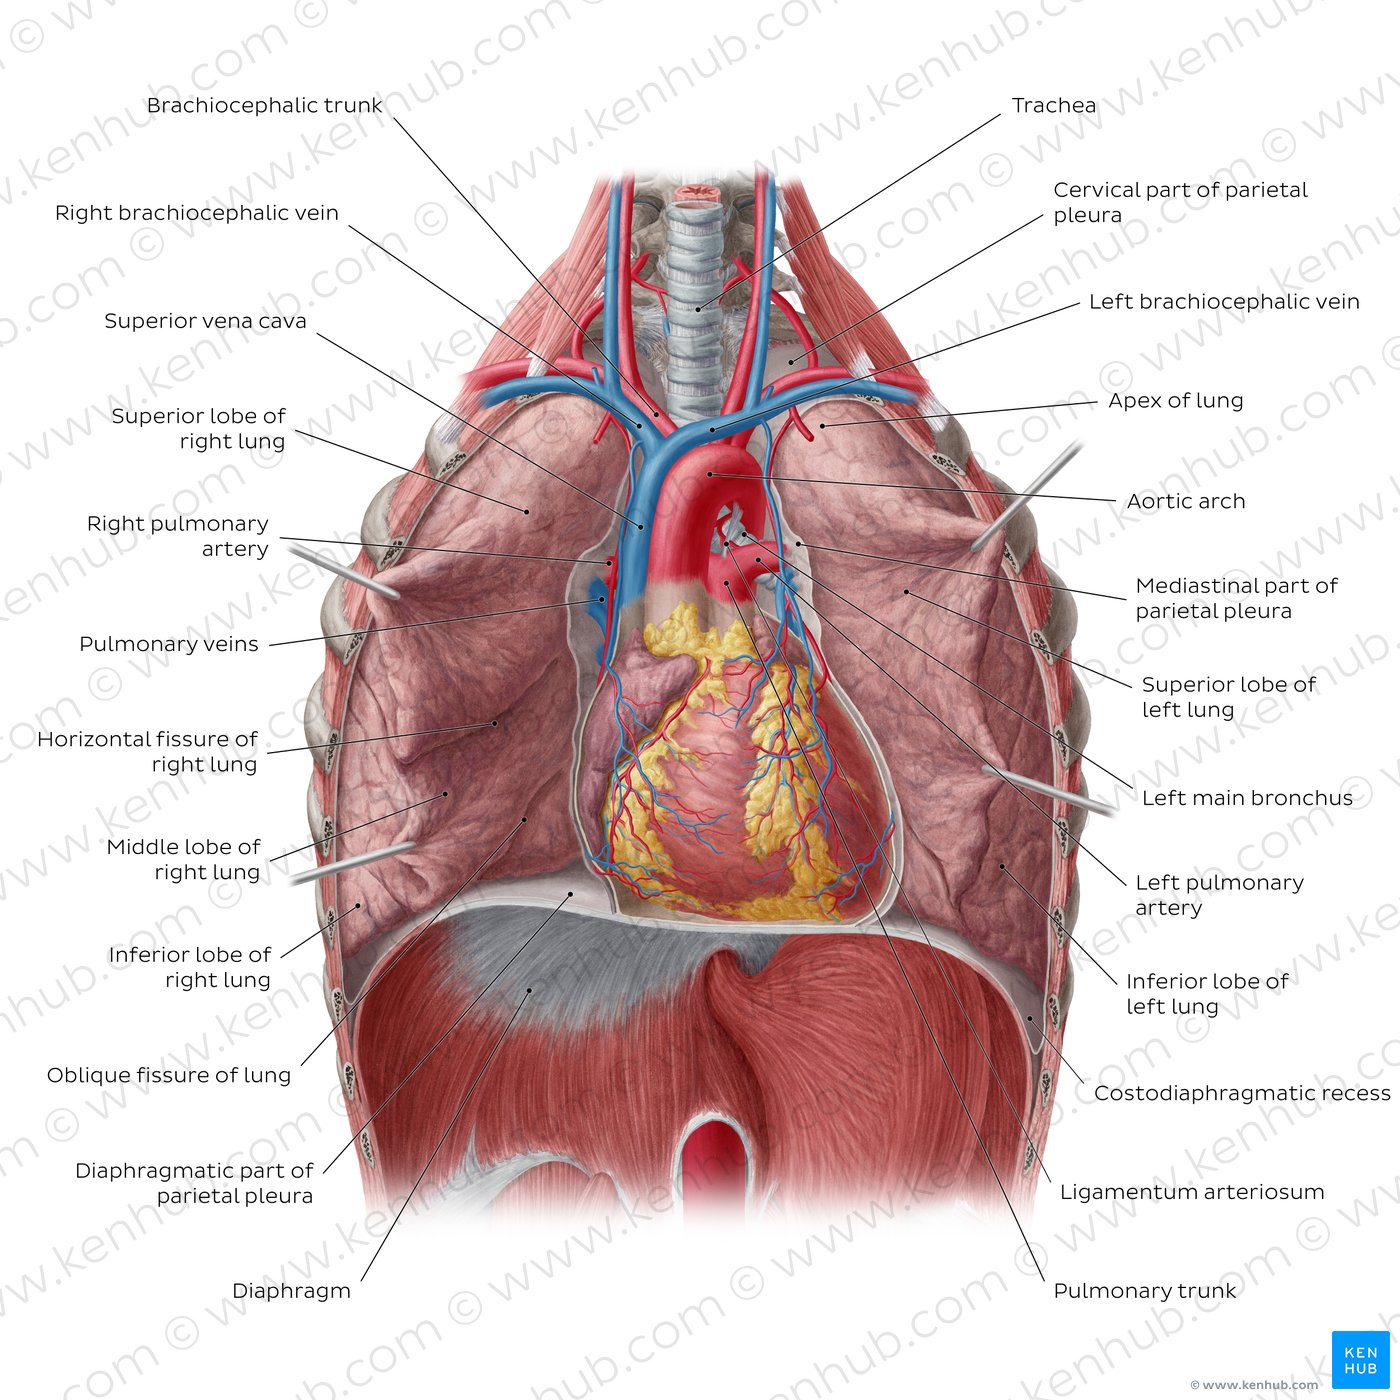 Overview of the lungs in-situ (anterior view)